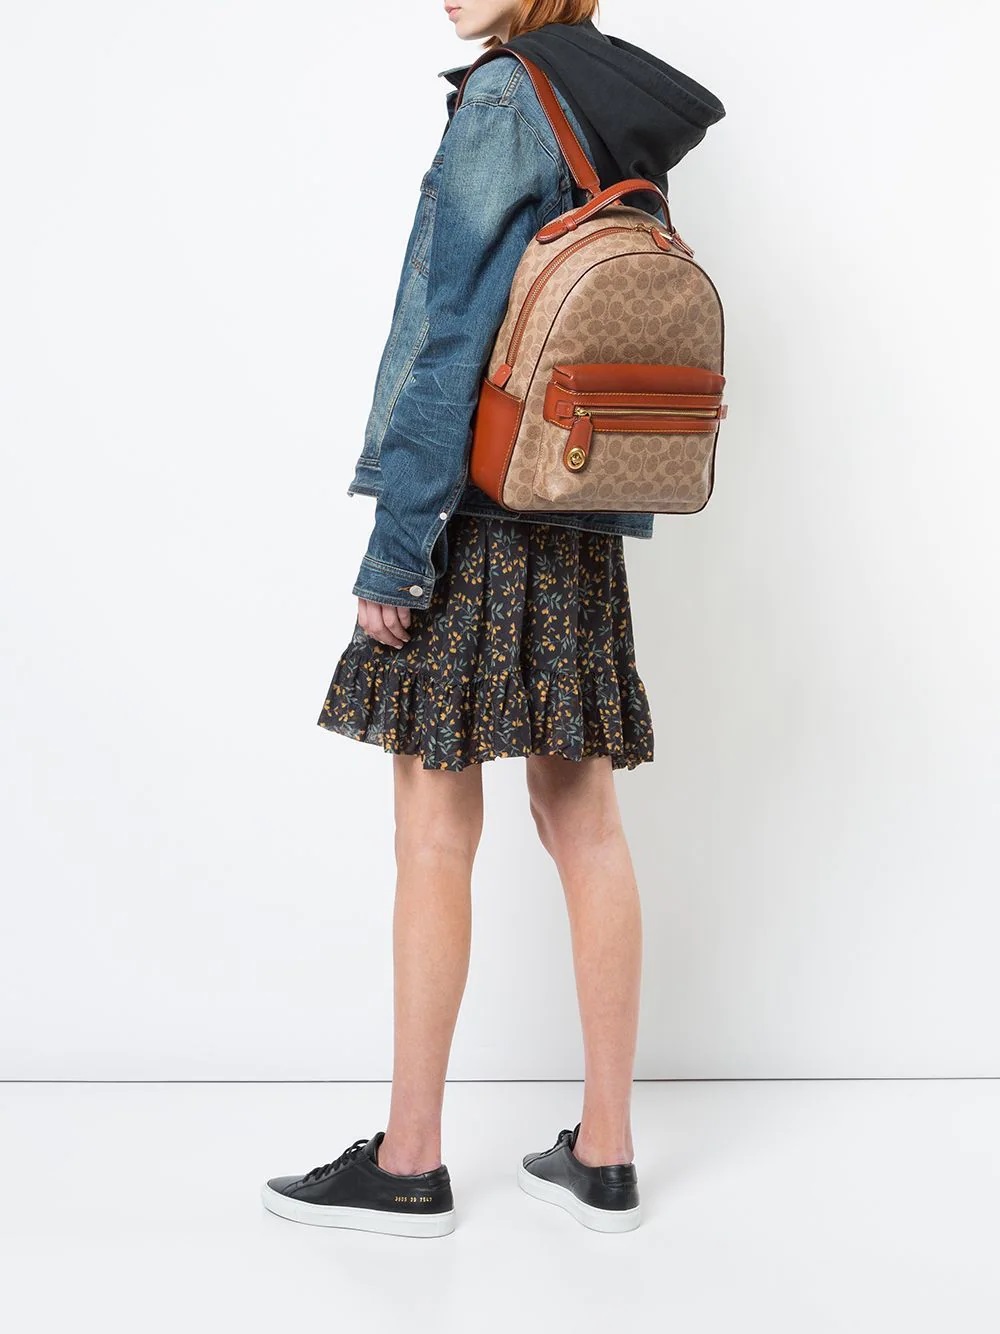 BALO NỮ COACH CAMPUS BACKPACK 23 IN SIGNATURE CANVAS TAN 6